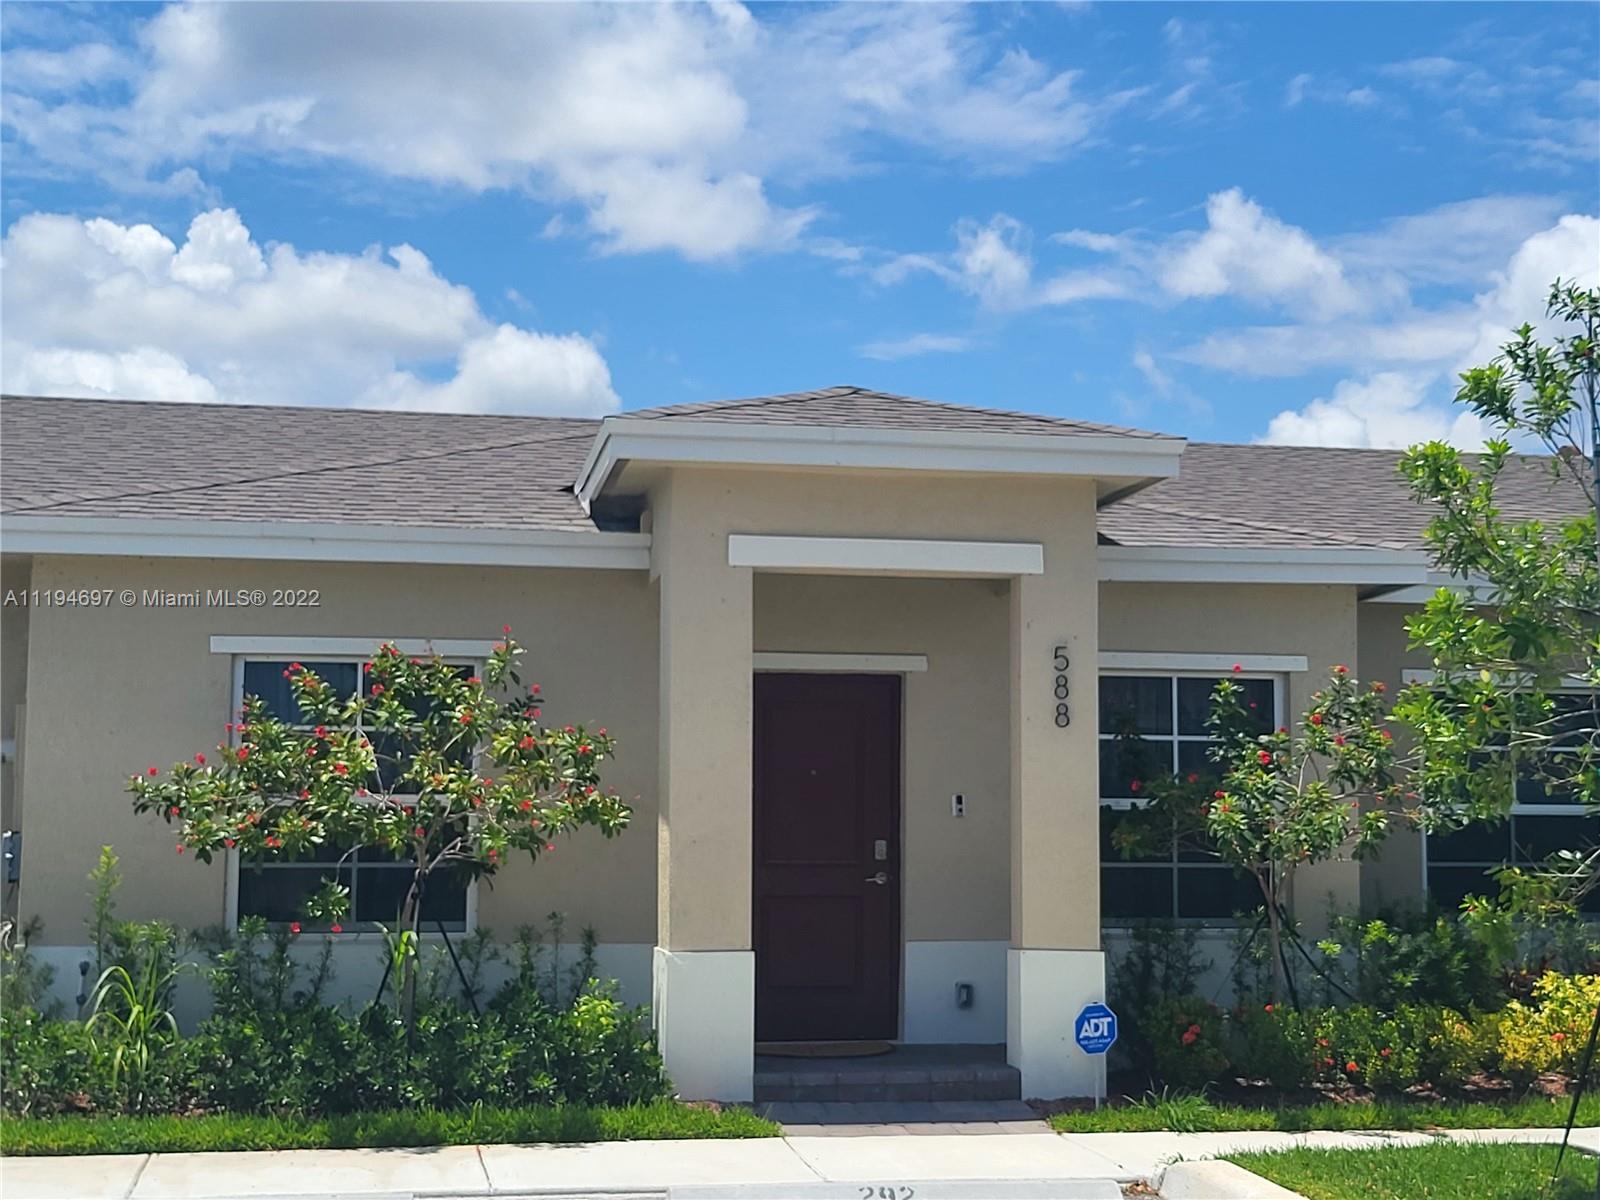 1 STORY 3 bed/2 bath 2021 year built.* Rare opportunity, like new stainless steel appliances ,  washer and dryer included, smart home, Super-low HOA, NO HOA APPROVAL IS NEEDED  , Landscaping, Playground. Amazing location, next to shopping center, schools & more.  2 assigned (#291 #292) +  guest parking in front of the property.